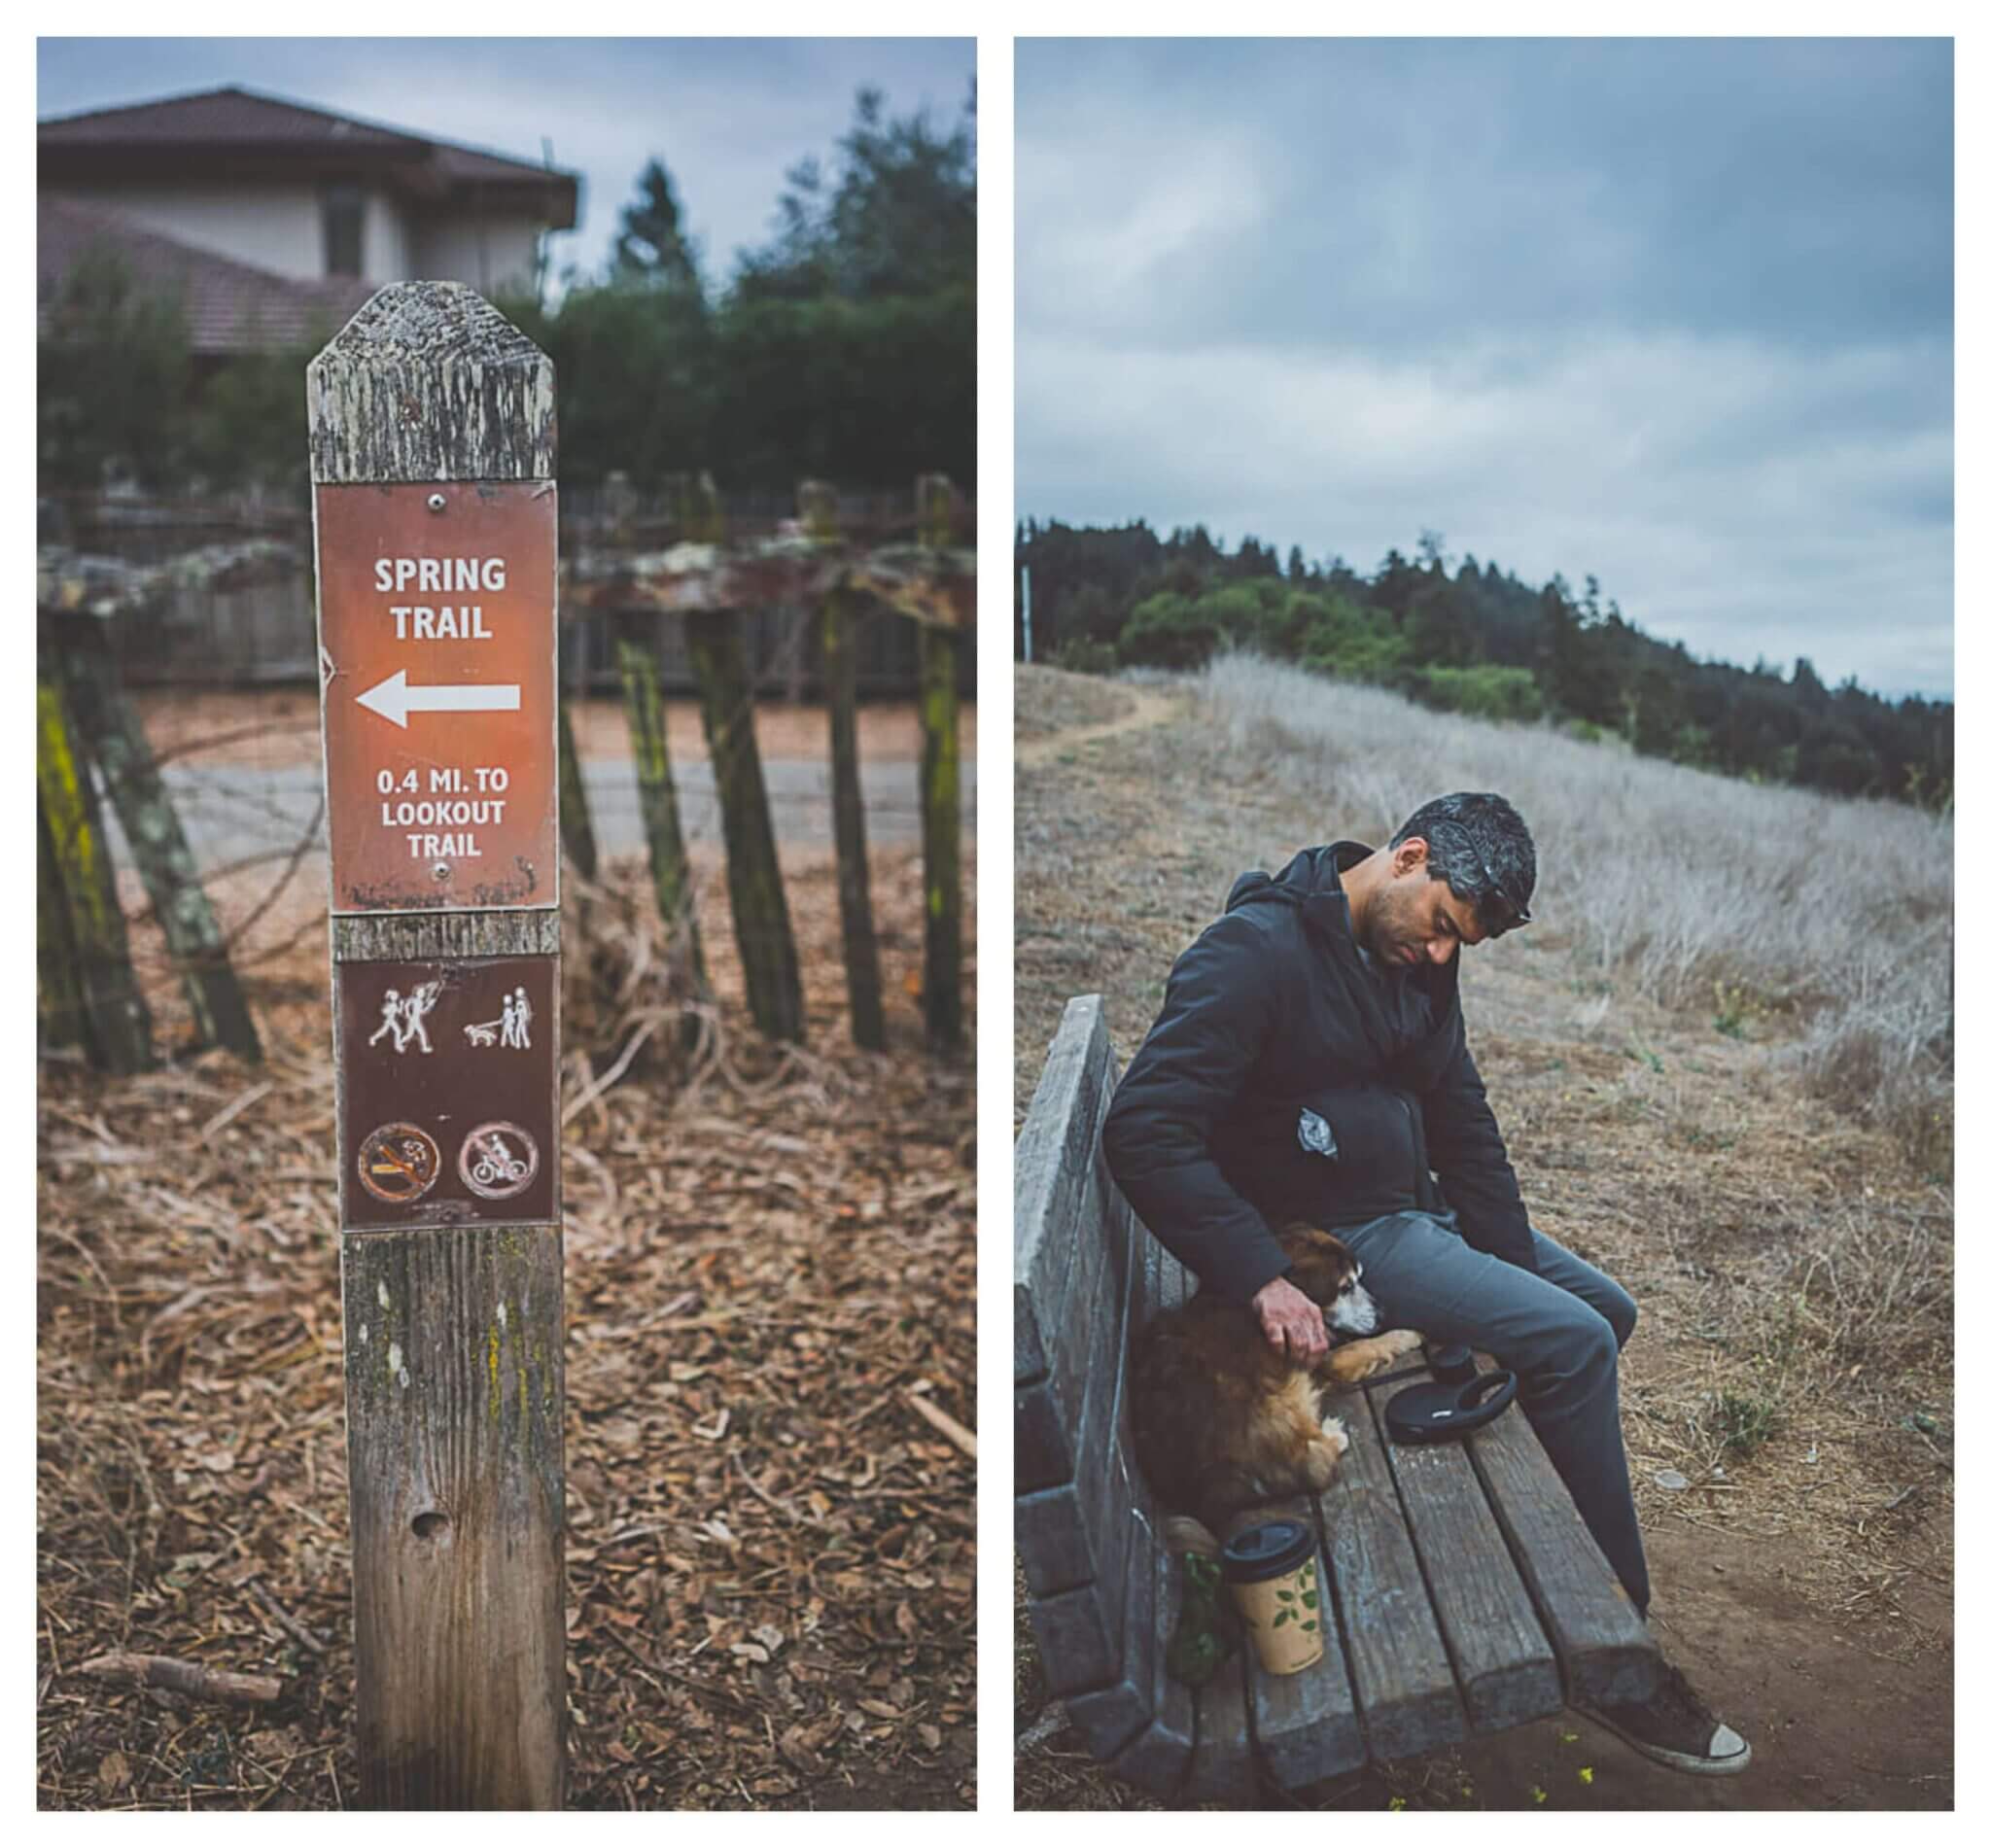 The perfect dog friendly Santa Cruz guide for your pup!